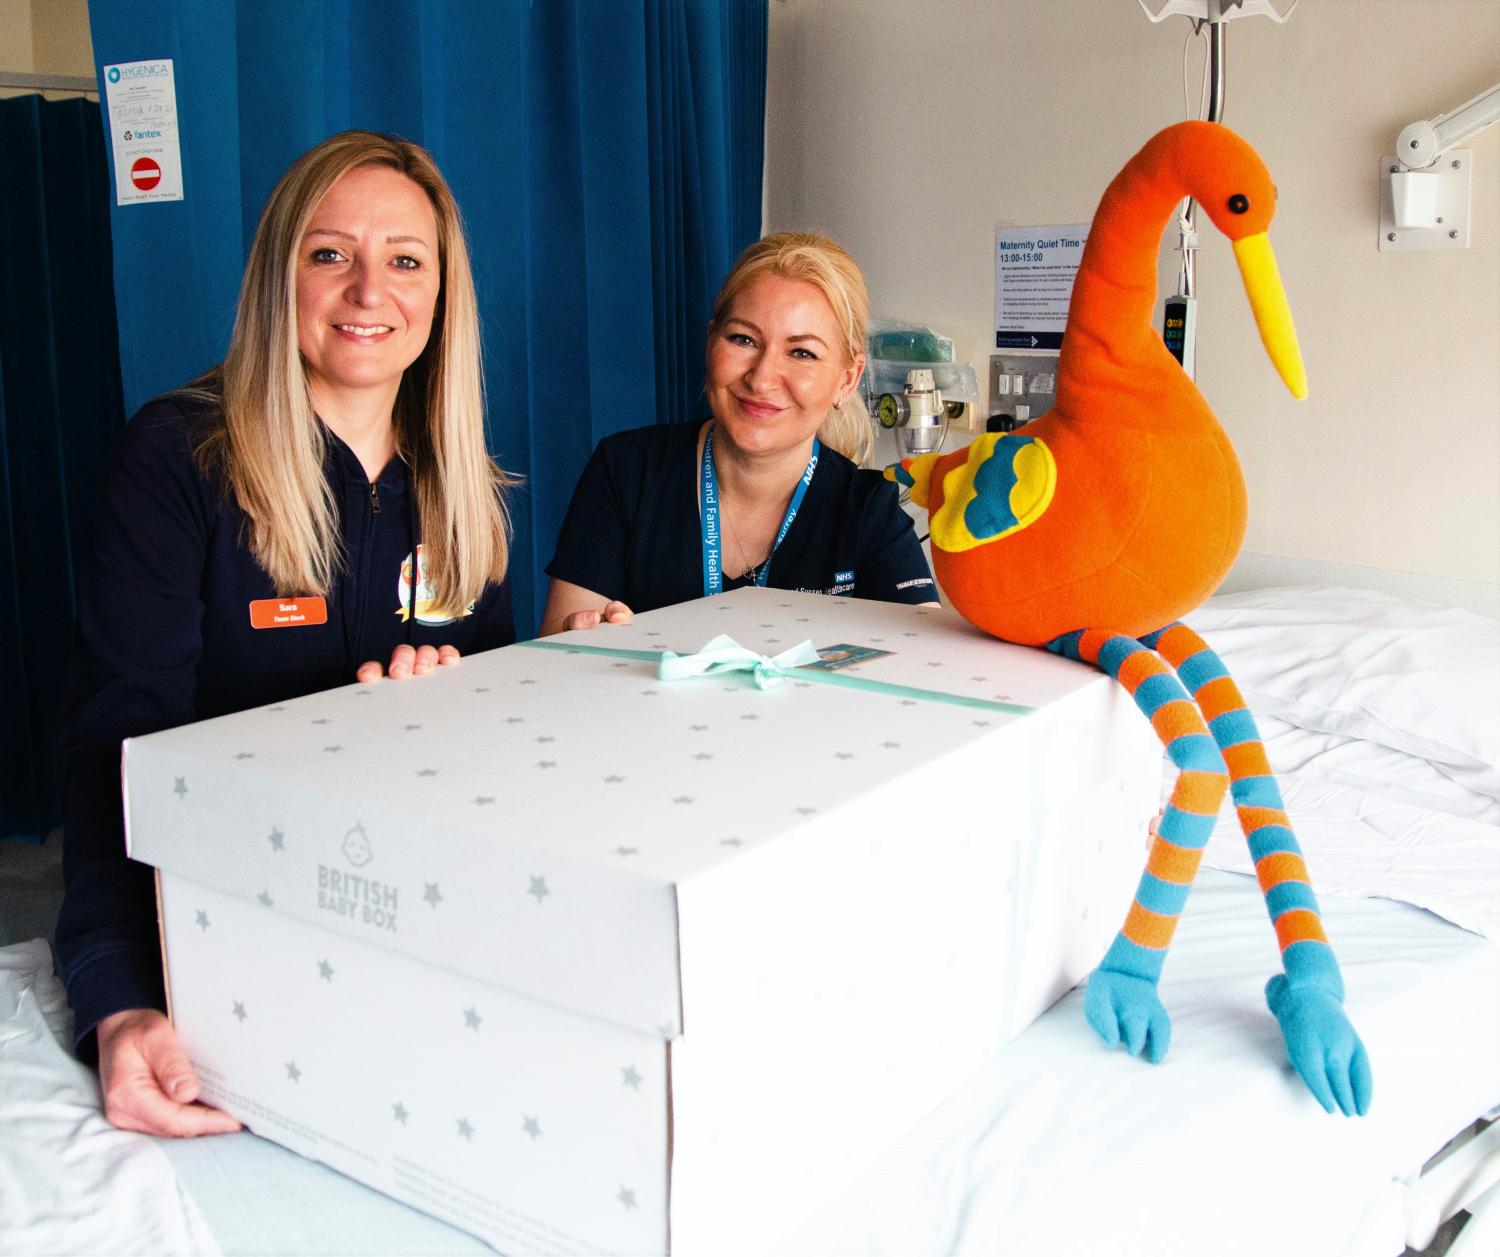 Mary Clare Chapman (right) receives Baby Box from Stripey Stork’s Operations Manager, Sara Beadle (left) at East Surrey Hospital